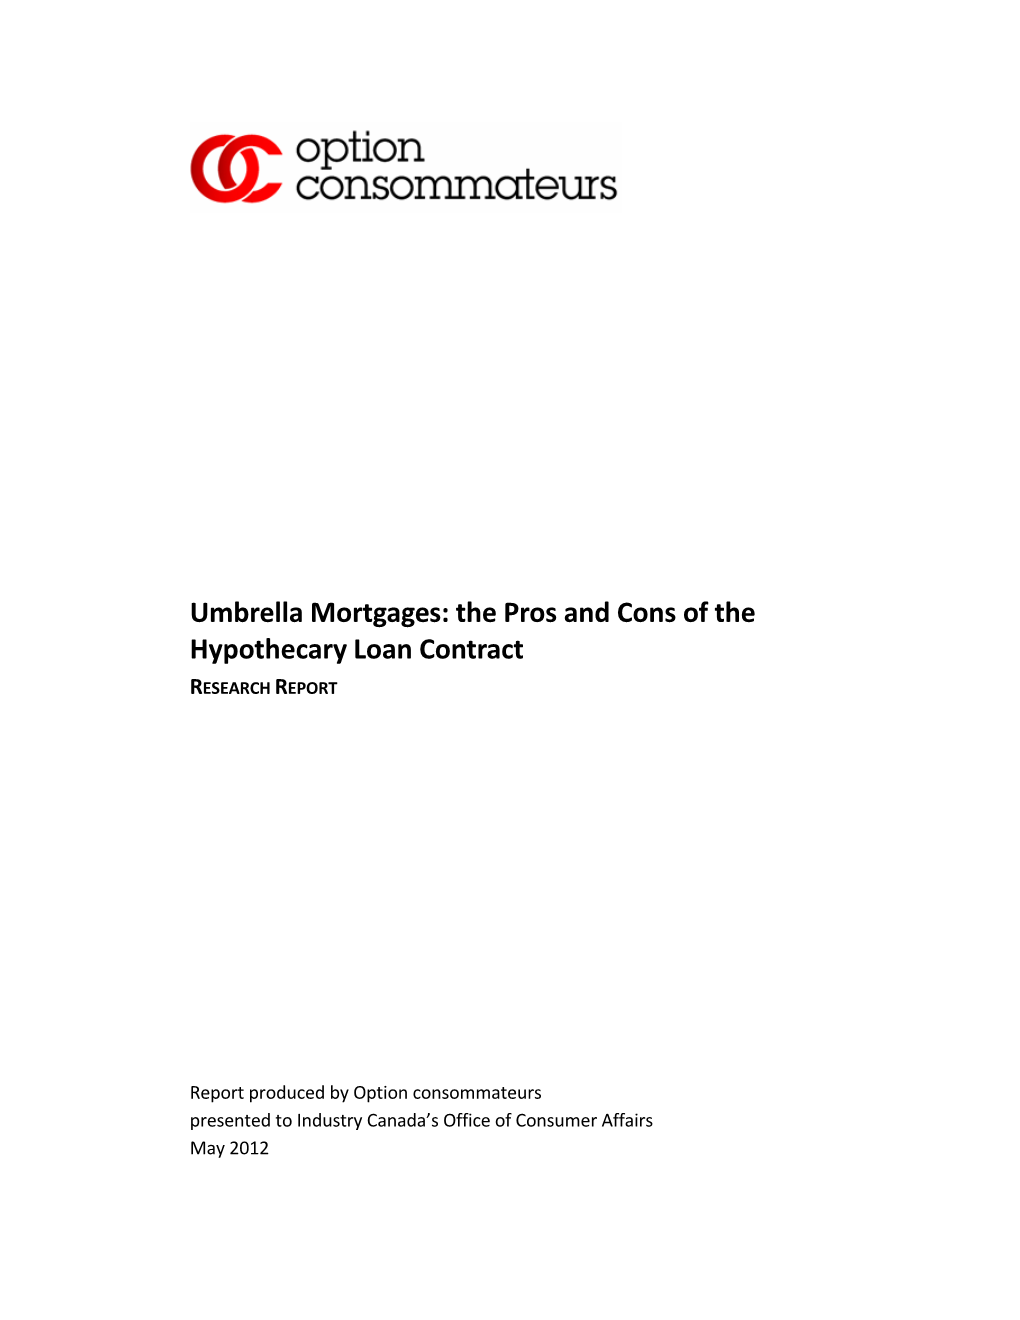 Umbrella Mortgages: the Pros and Cons of the Hypothecary Loan Contract RESEARCH REPORT